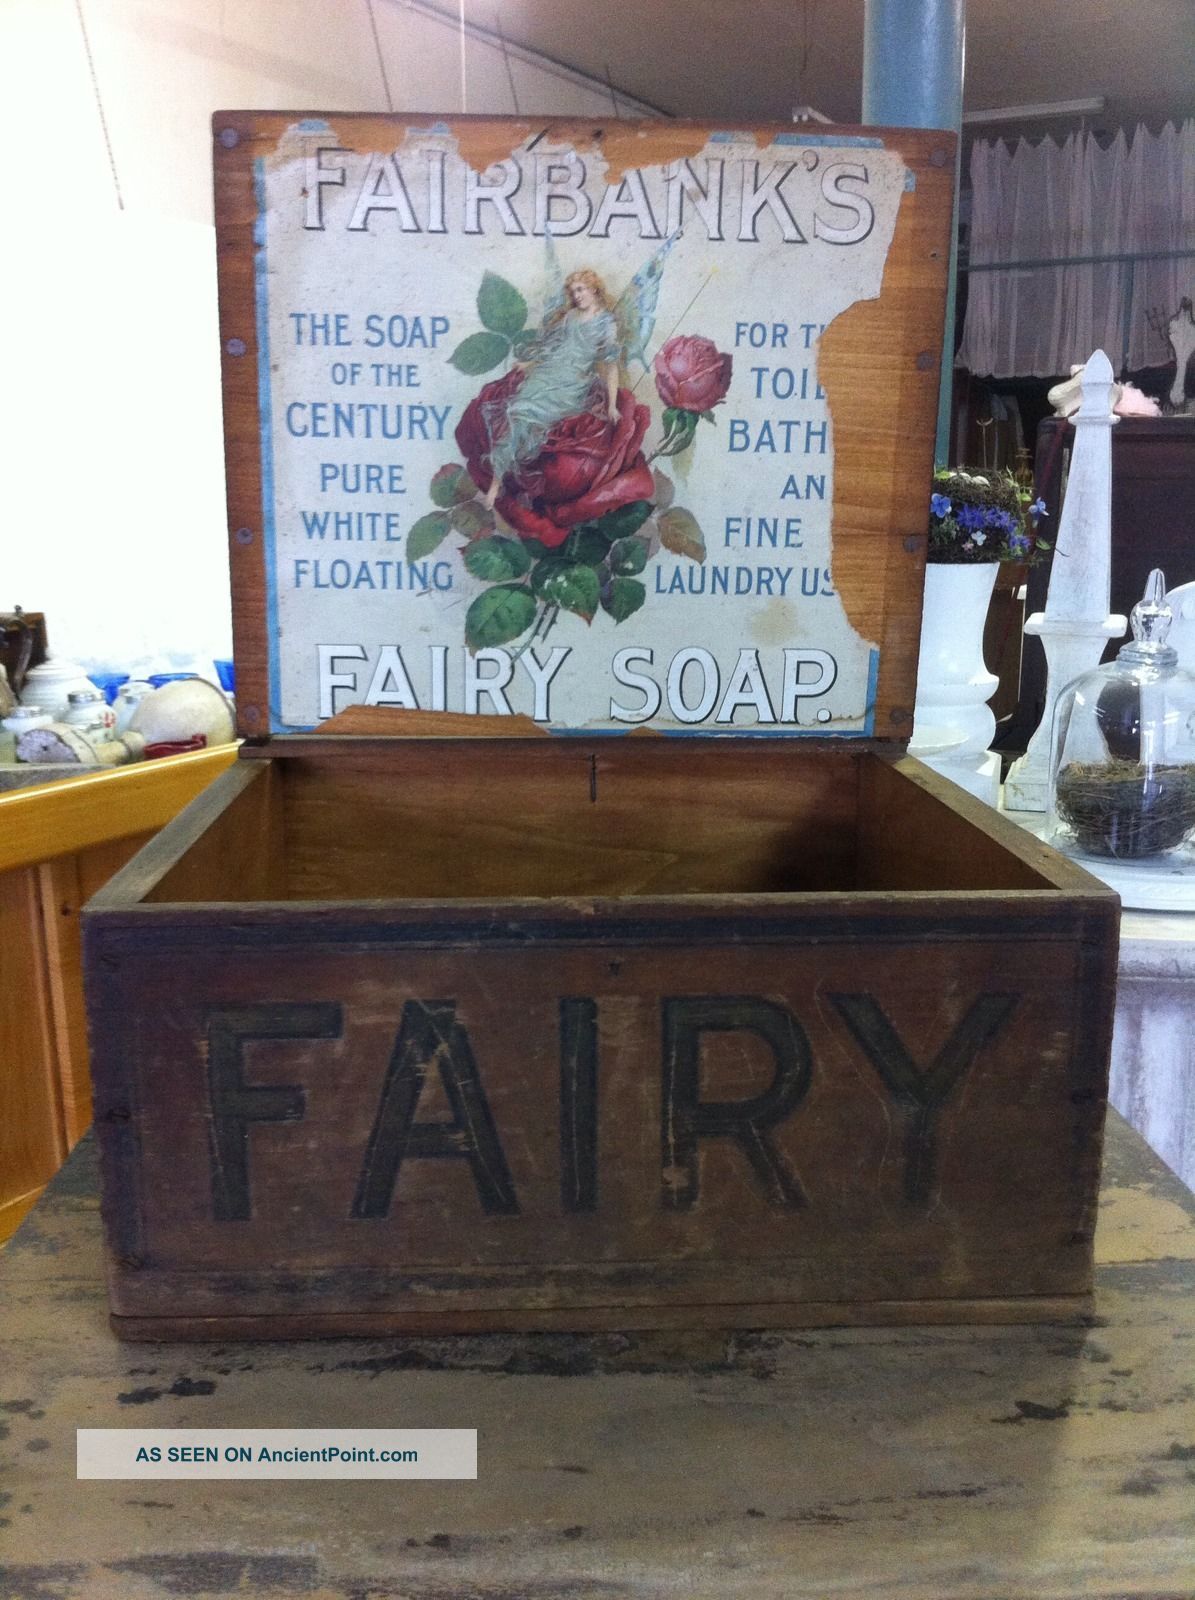 Fairbanks Fairy Soap Box Advertising Wood Antique Country Store Display Chic Other Mercantile Antiques photo